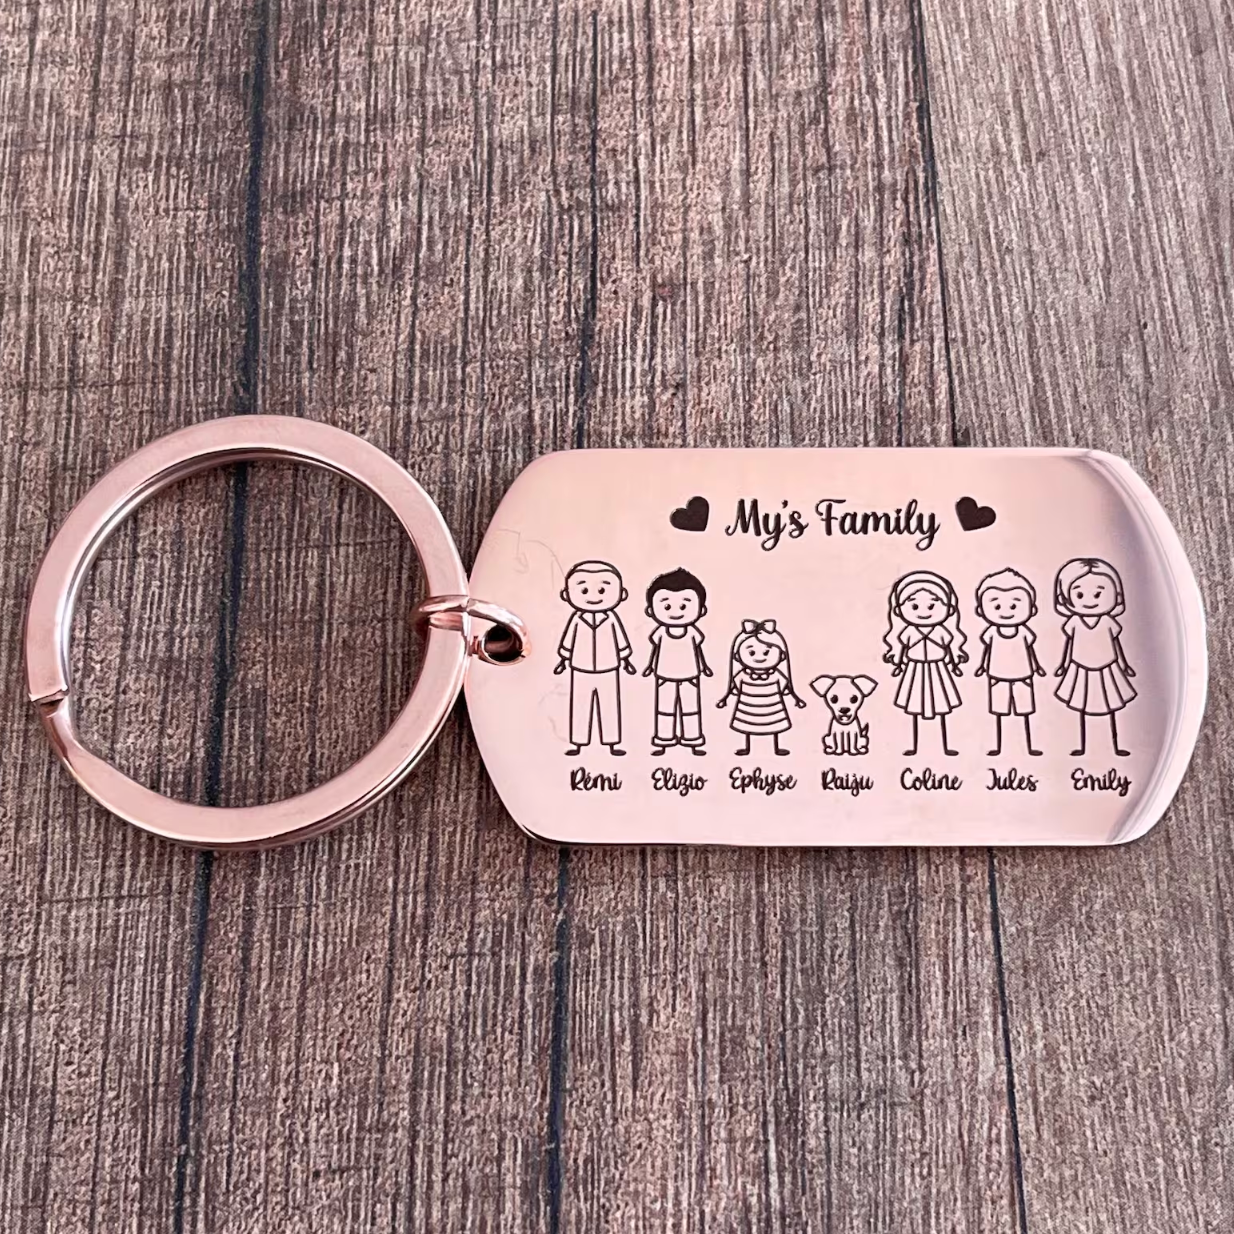 Personalized engraved family key ring in stainless steel metal